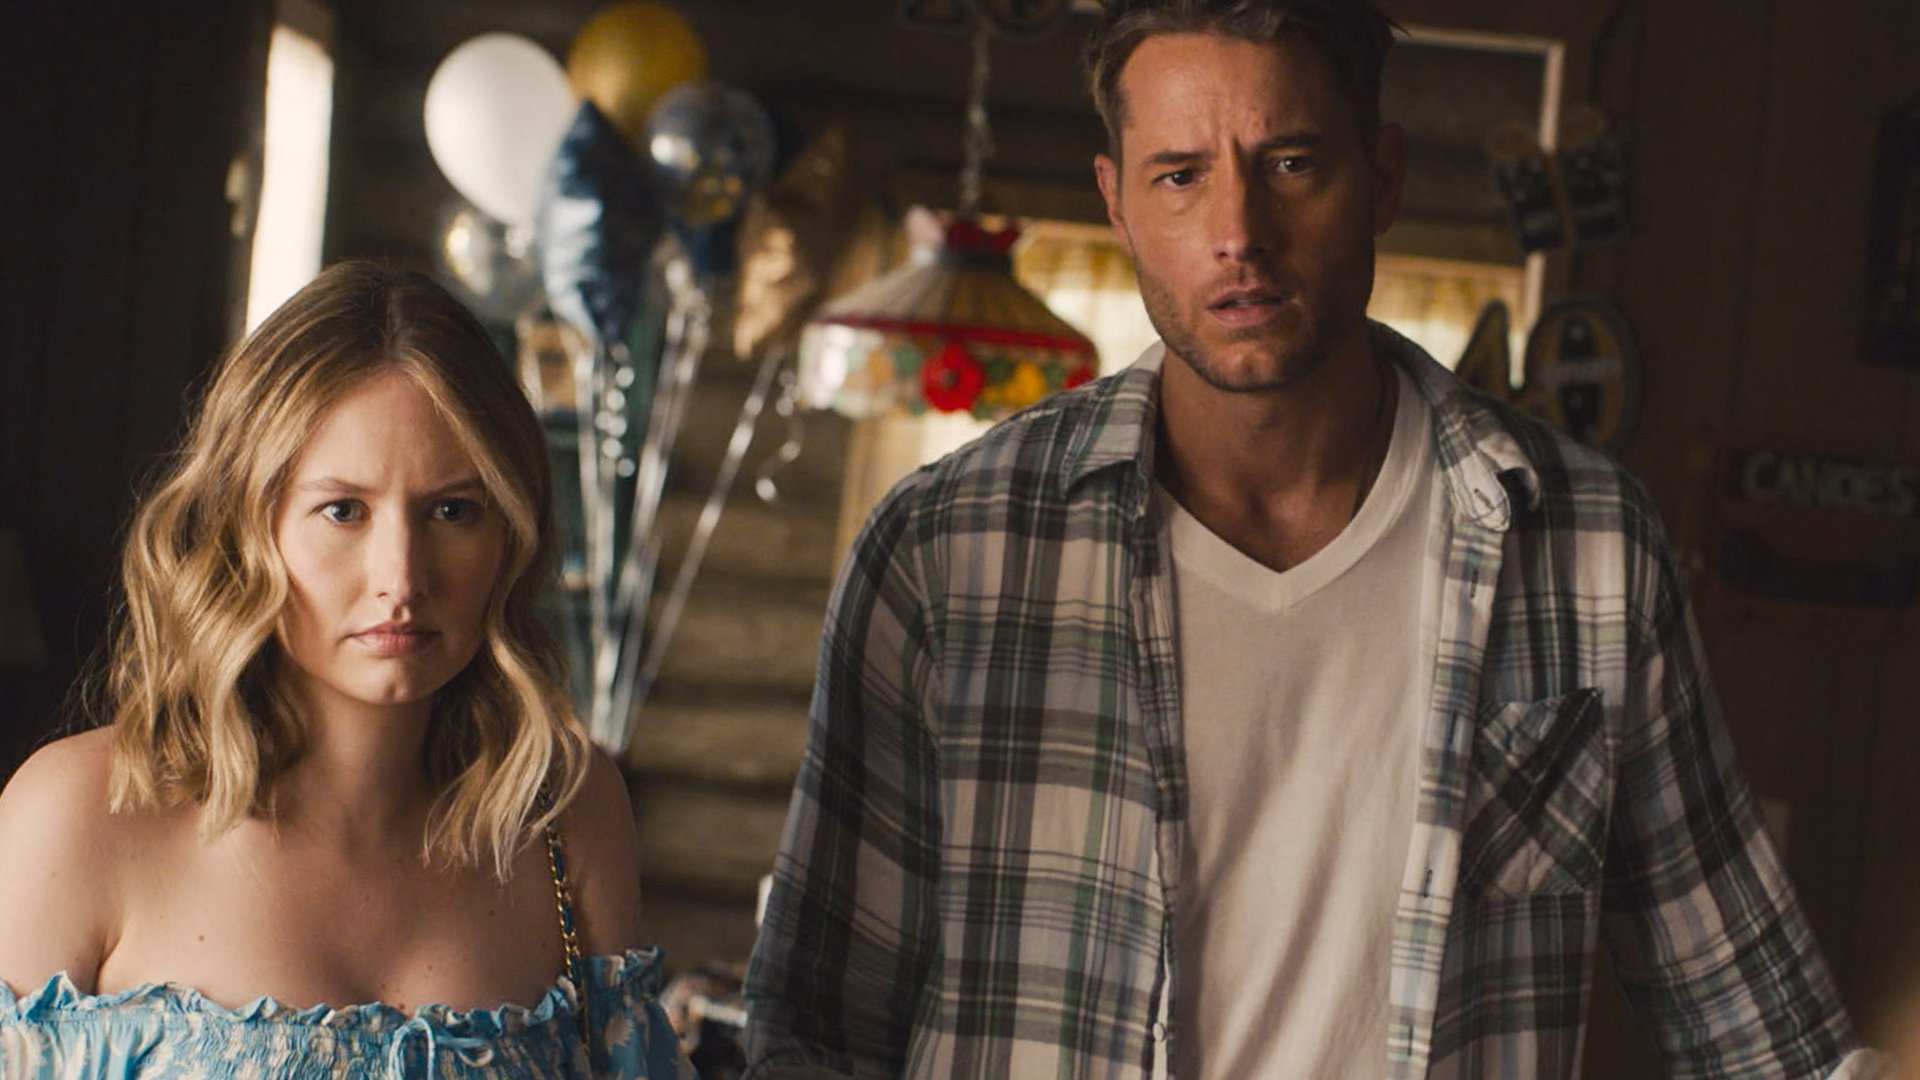 Caitlin Thompson as Madison and Justin Hartley as Kevin look shocked at the Pearson family cabin in ‘This Is Us’ Season 5 Episode 1